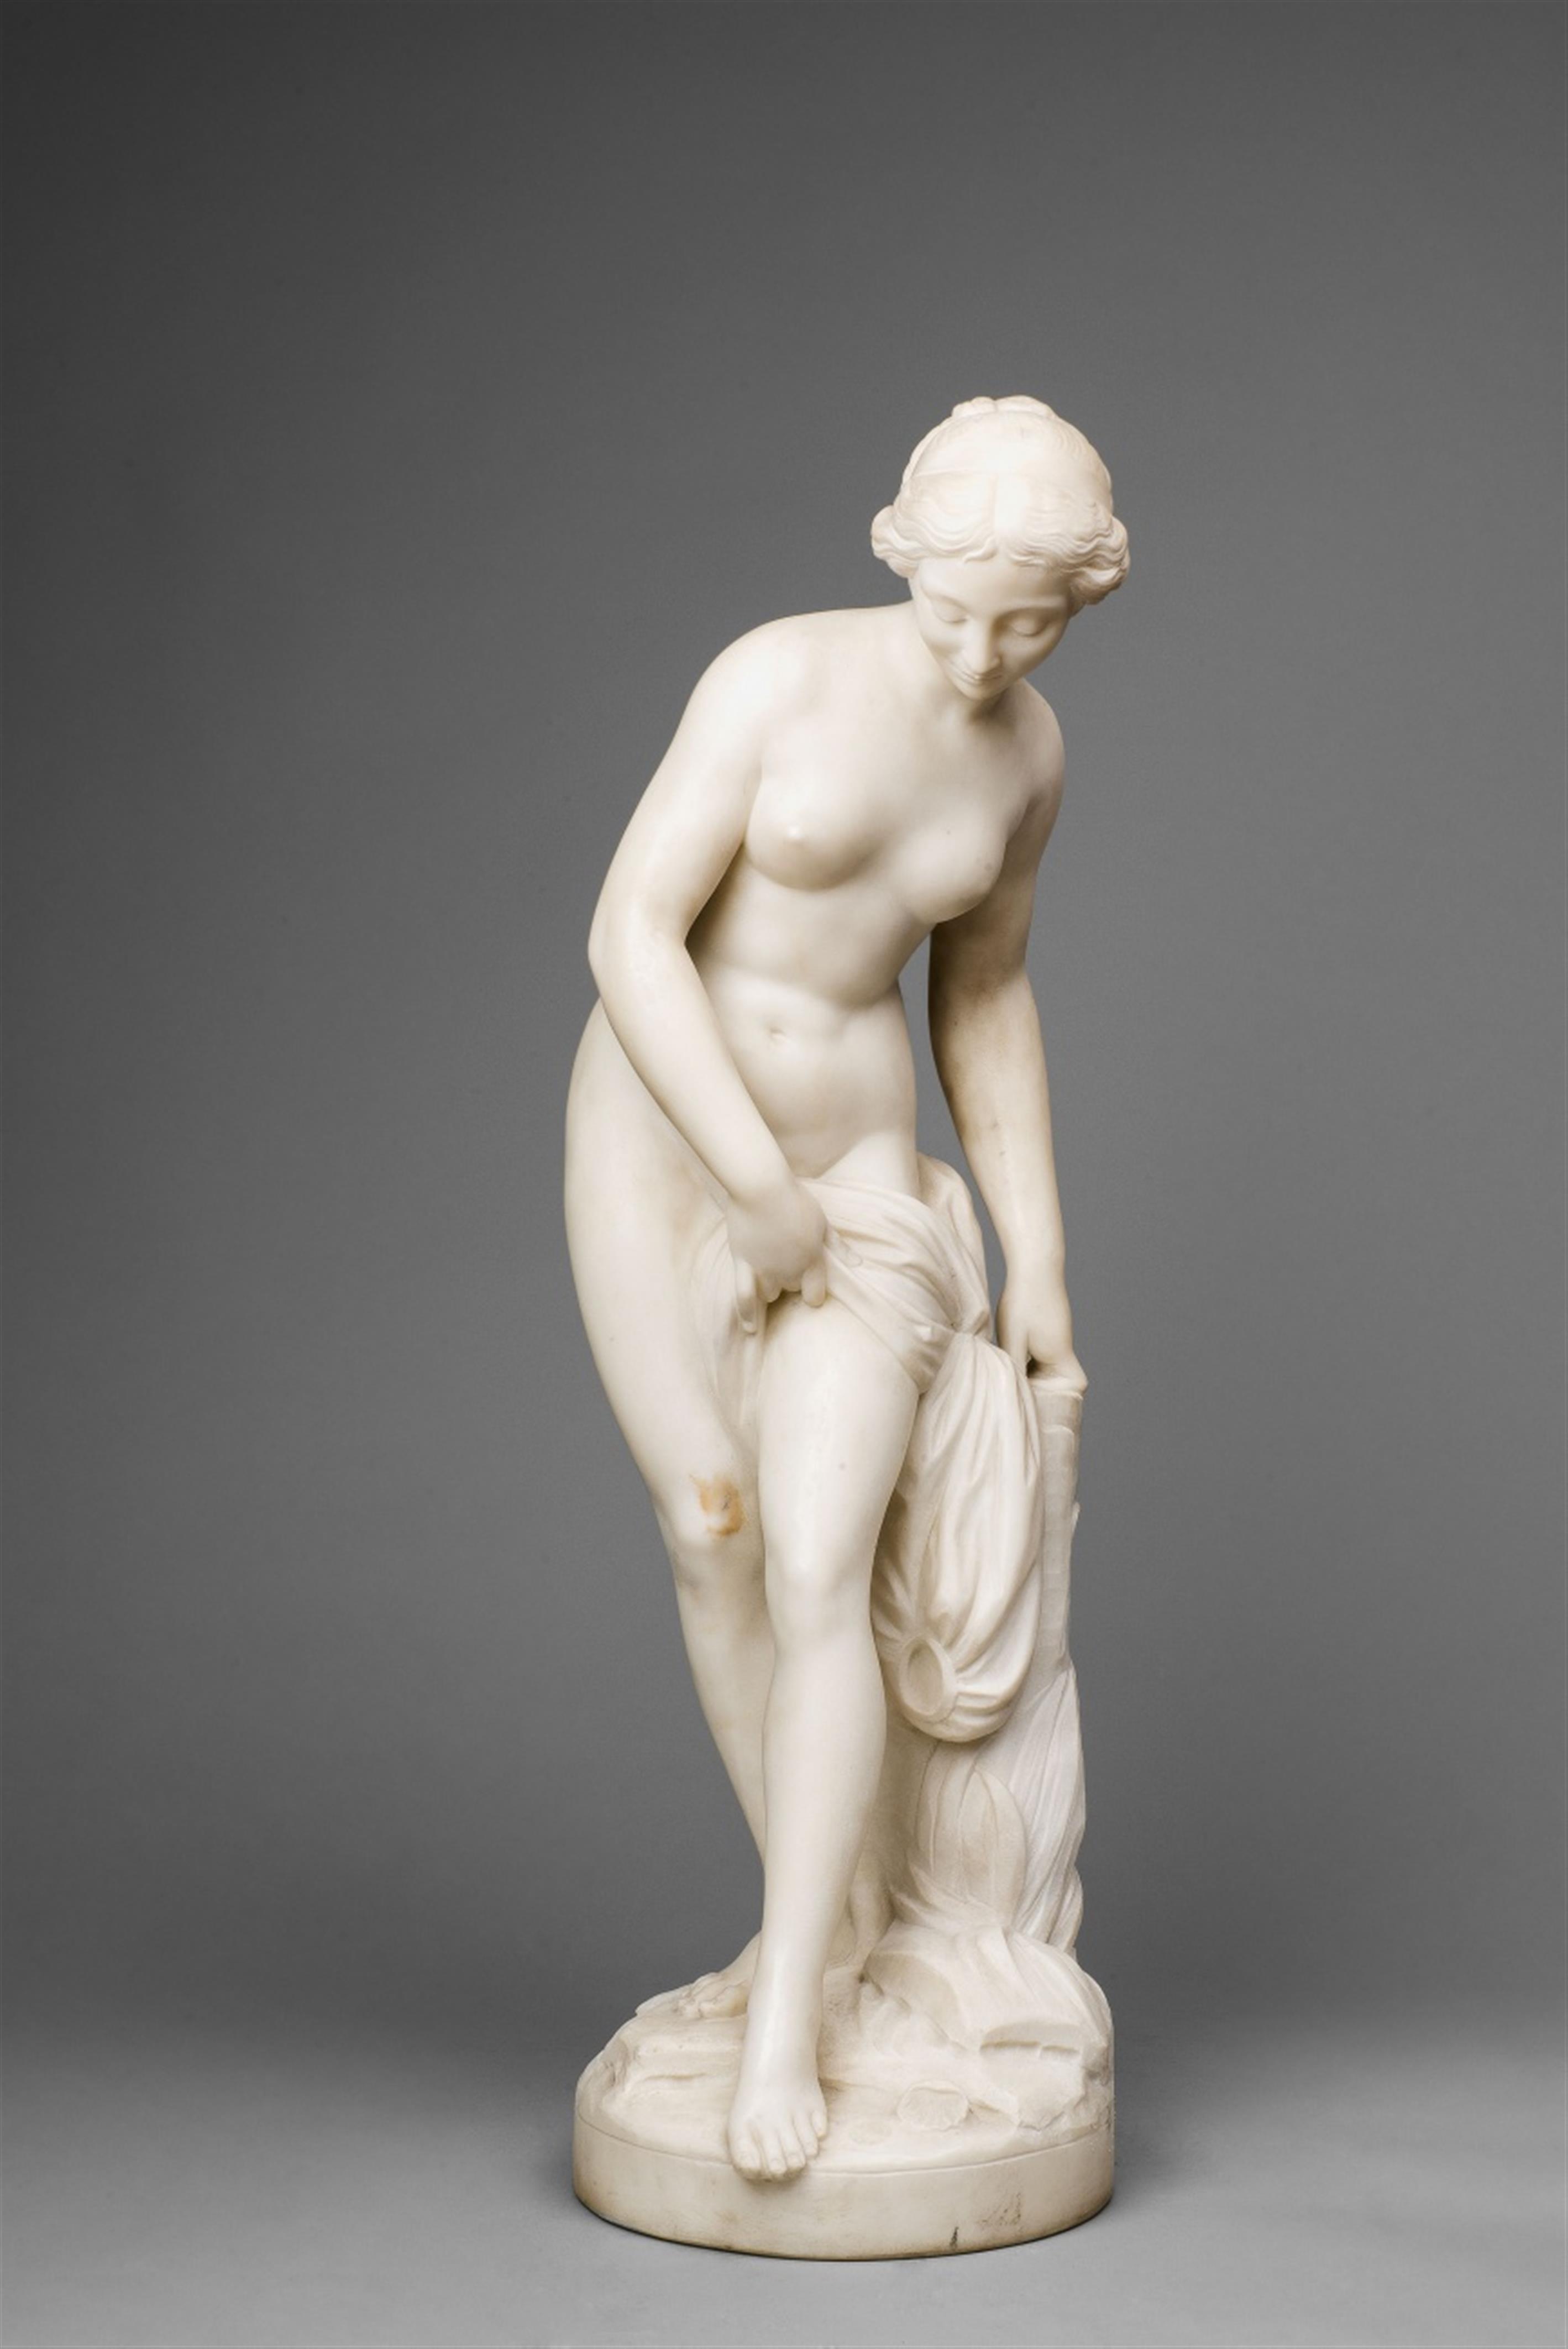 Baigneuse nach Etienne-Maurice Falconet - image-1